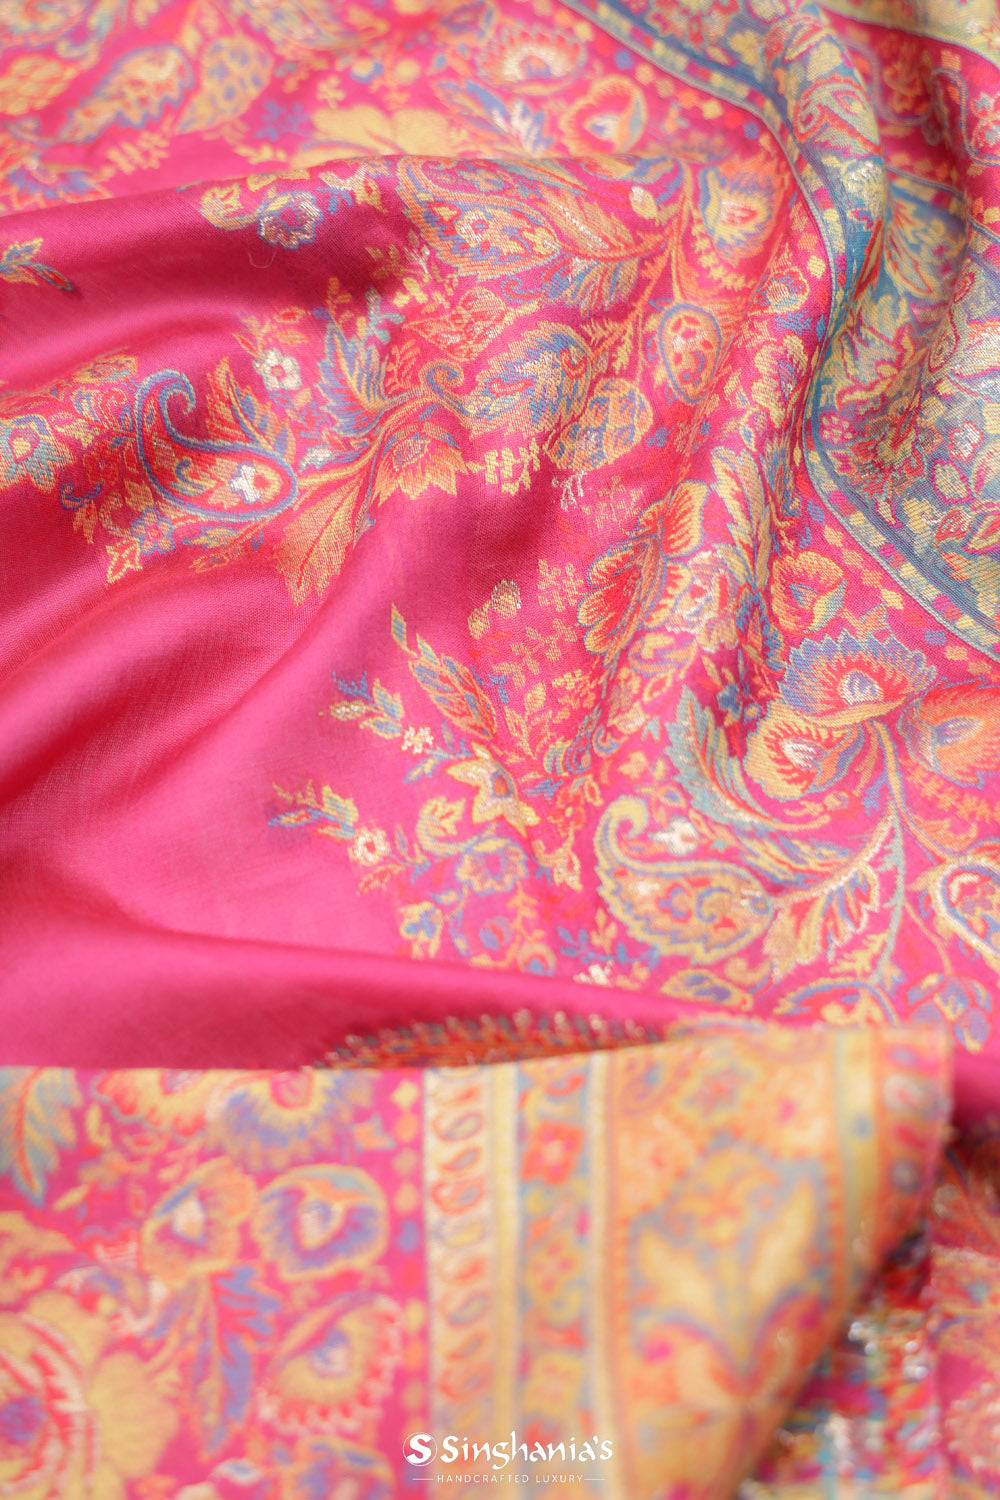 Mexican Pink Kani Handloom Saree With Floral Motifs